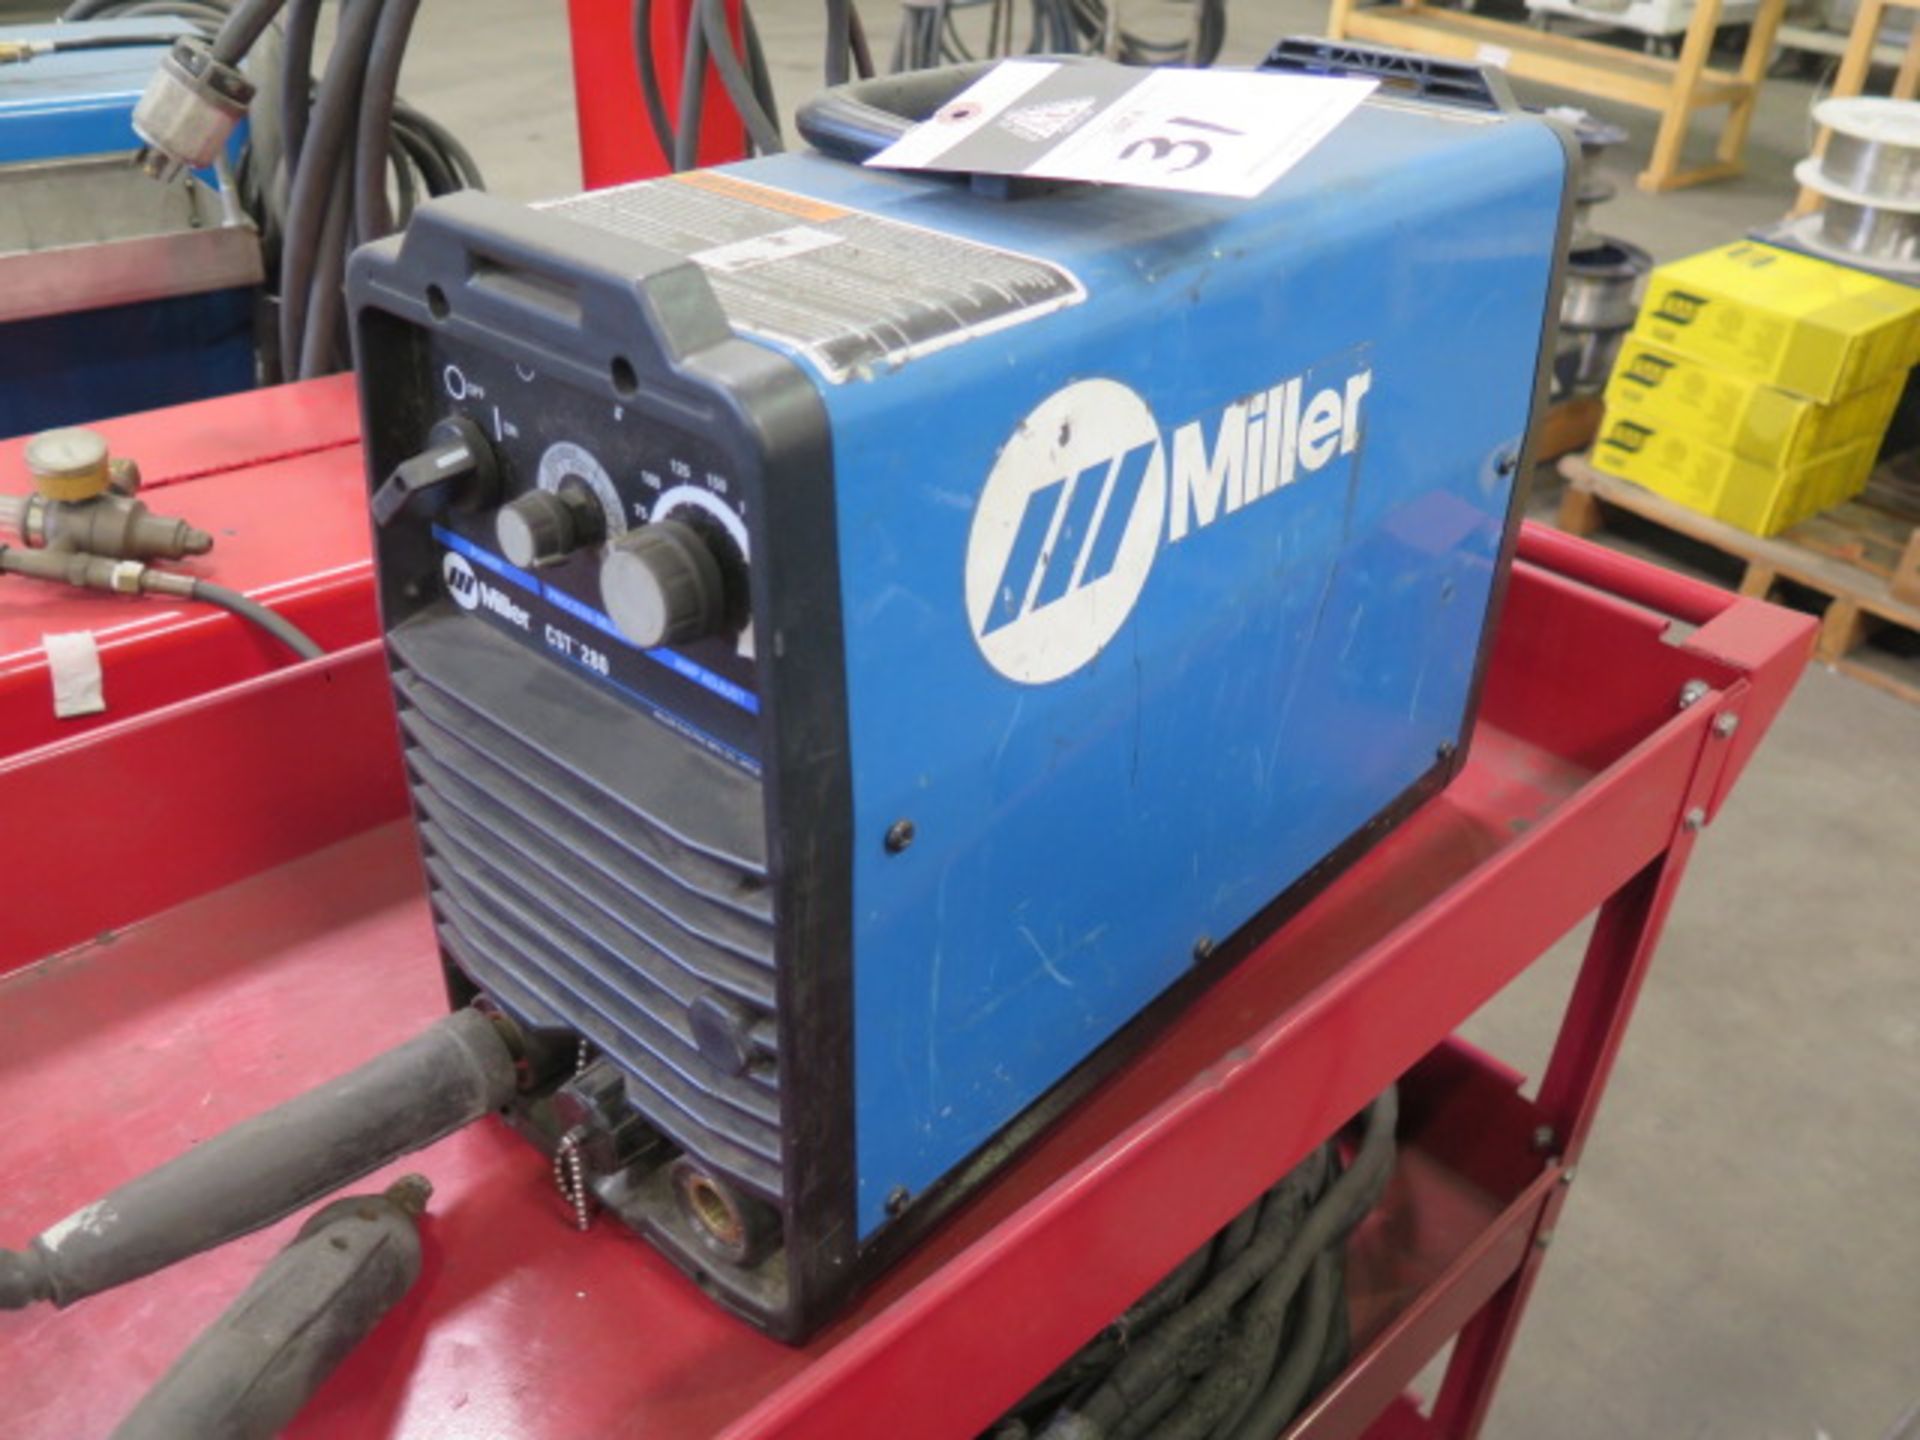 Miller CST-280 Arc Welding Power Source s/n MF360224G w/ Cart (SOLD AS-IS - NO WARRANTY) - Image 3 of 7